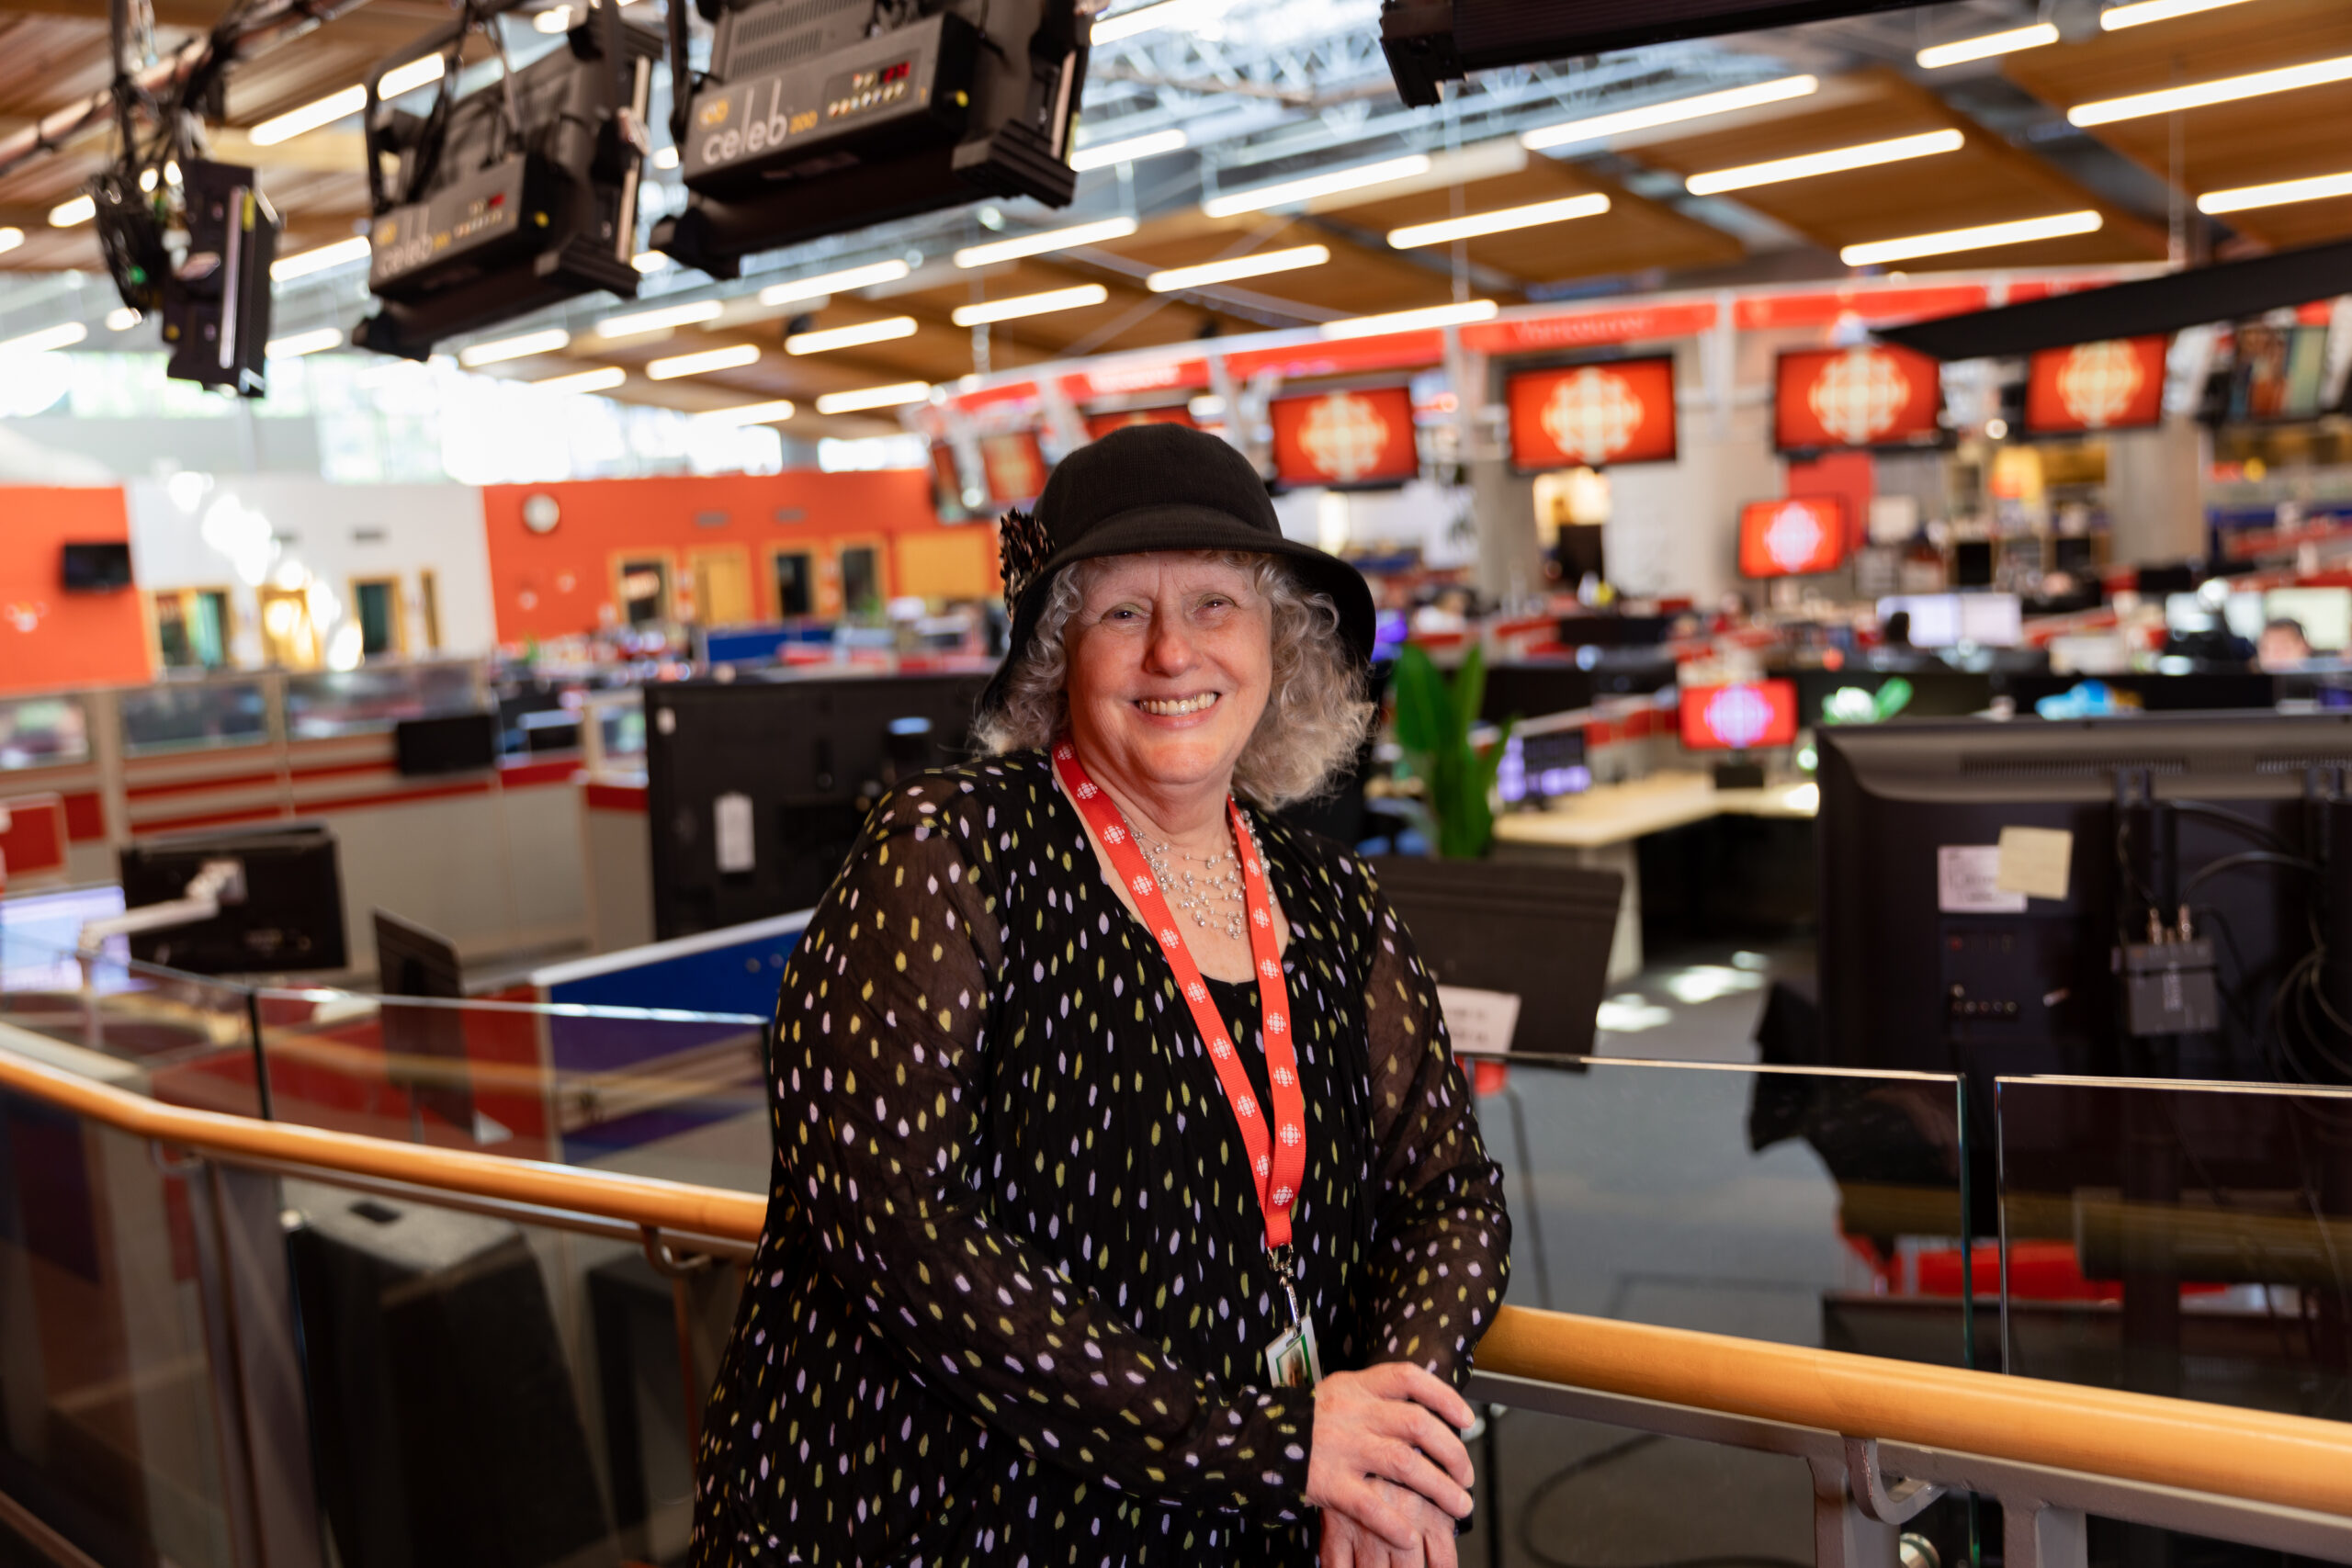 Cathy Browne is standing against a bannister in front of the CBC newsroom. She is wearing a printed black blouse and a black hat, and a red lanyard around her neck.